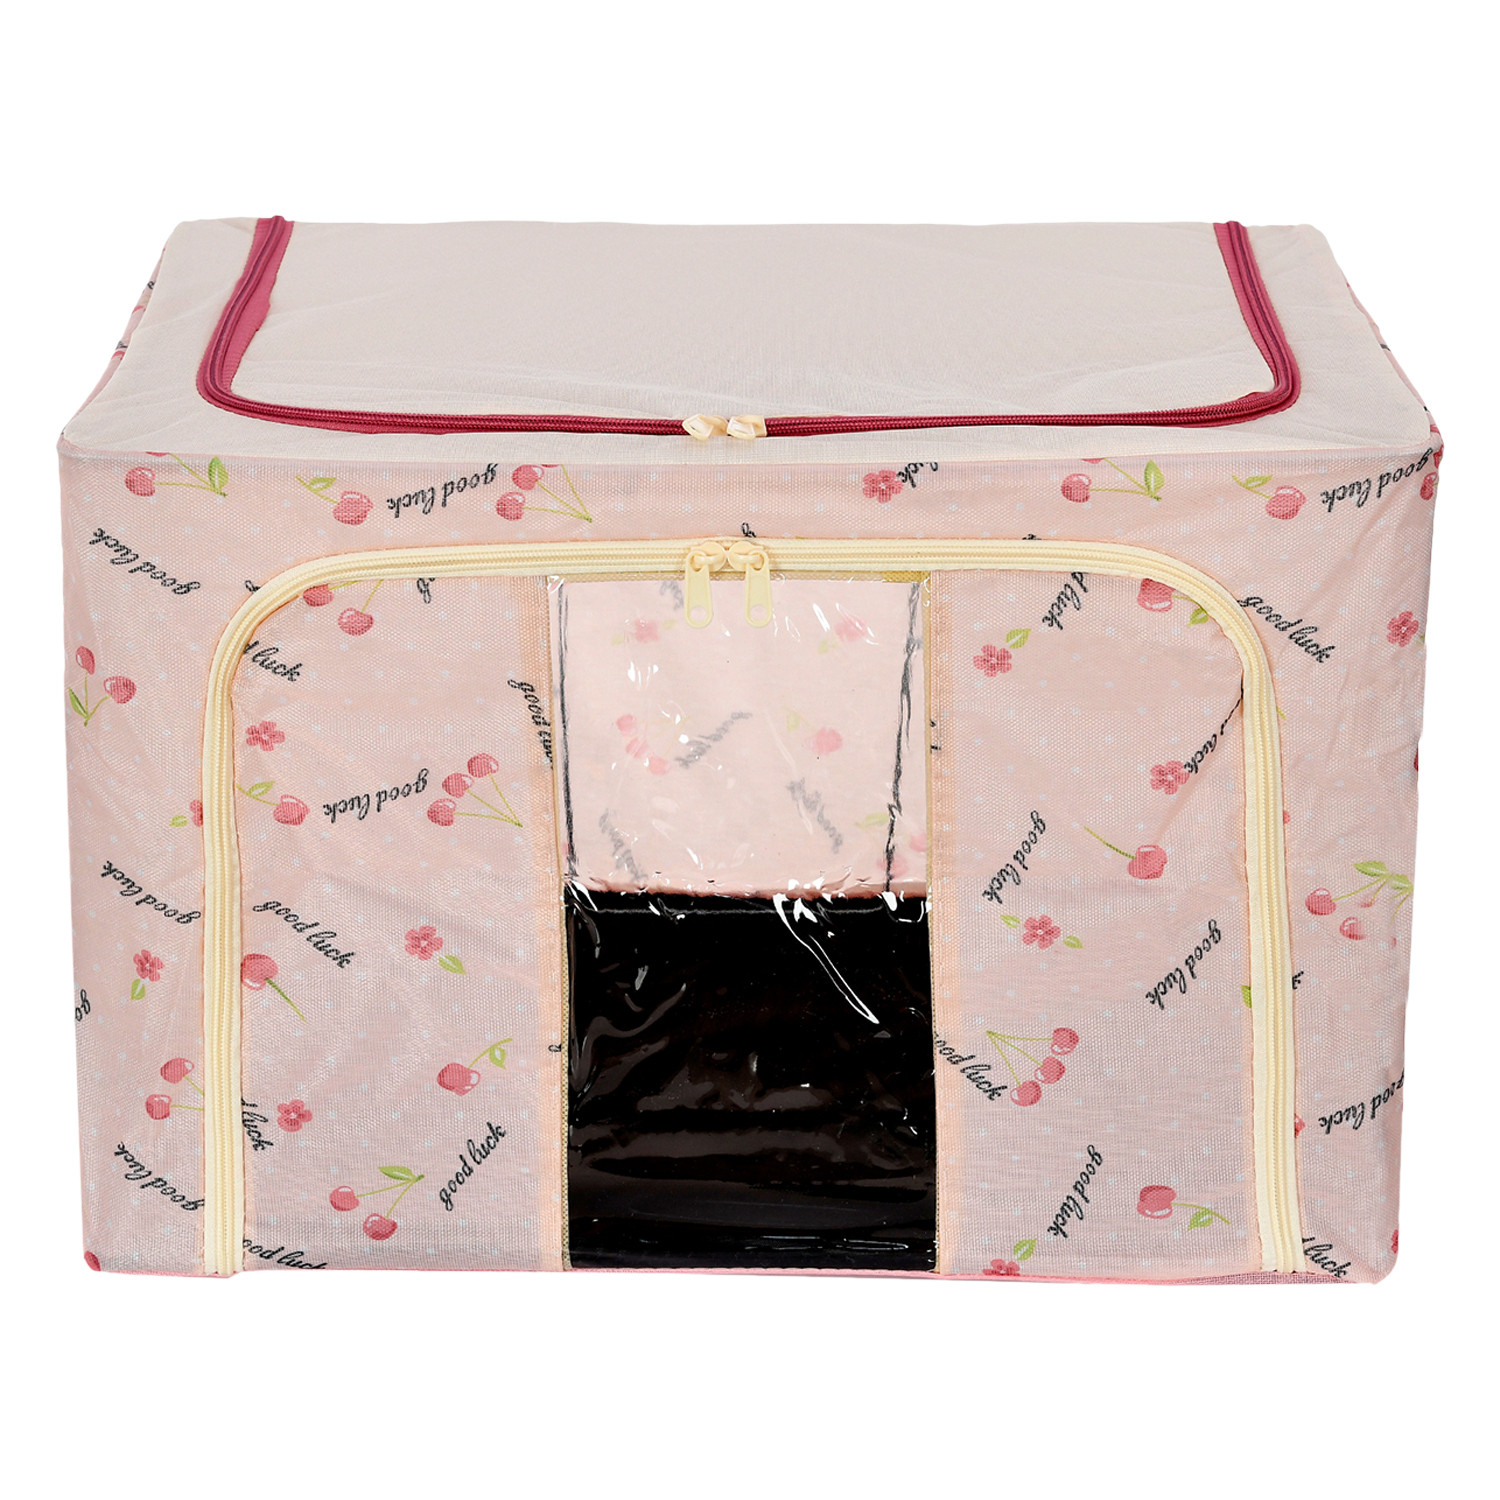 Kuber Industries Storage Box | Steel Frame Living Box | Storage Organizer For Clothes | Saree Cover for Woman | Good Luck Print Cloth Organizer | 66 Liter | Pink